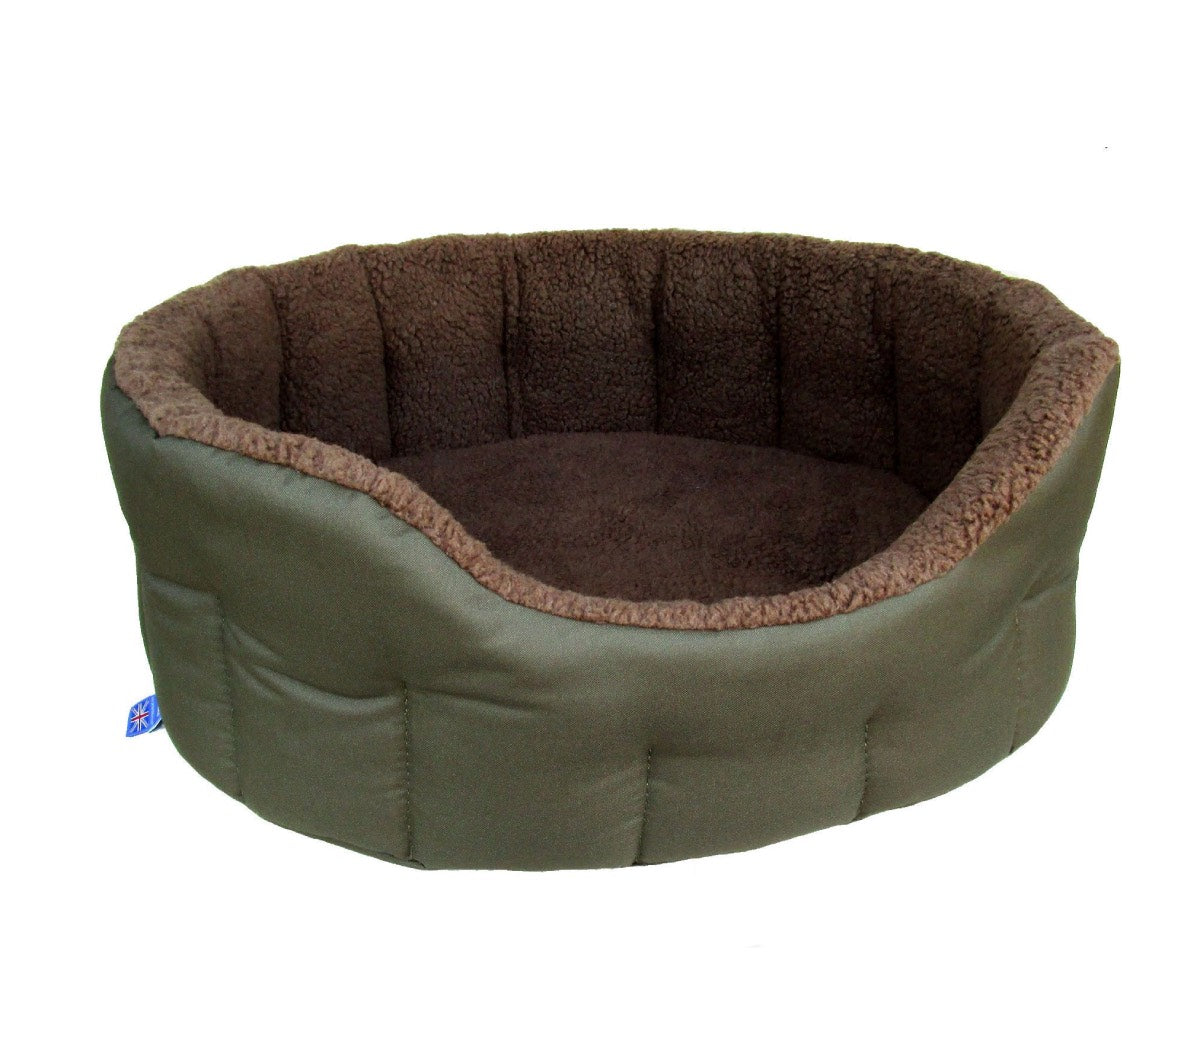 Heavy Duty Green Polyester With Mushroom Fleece Oval Dog Bed | Made in the UK